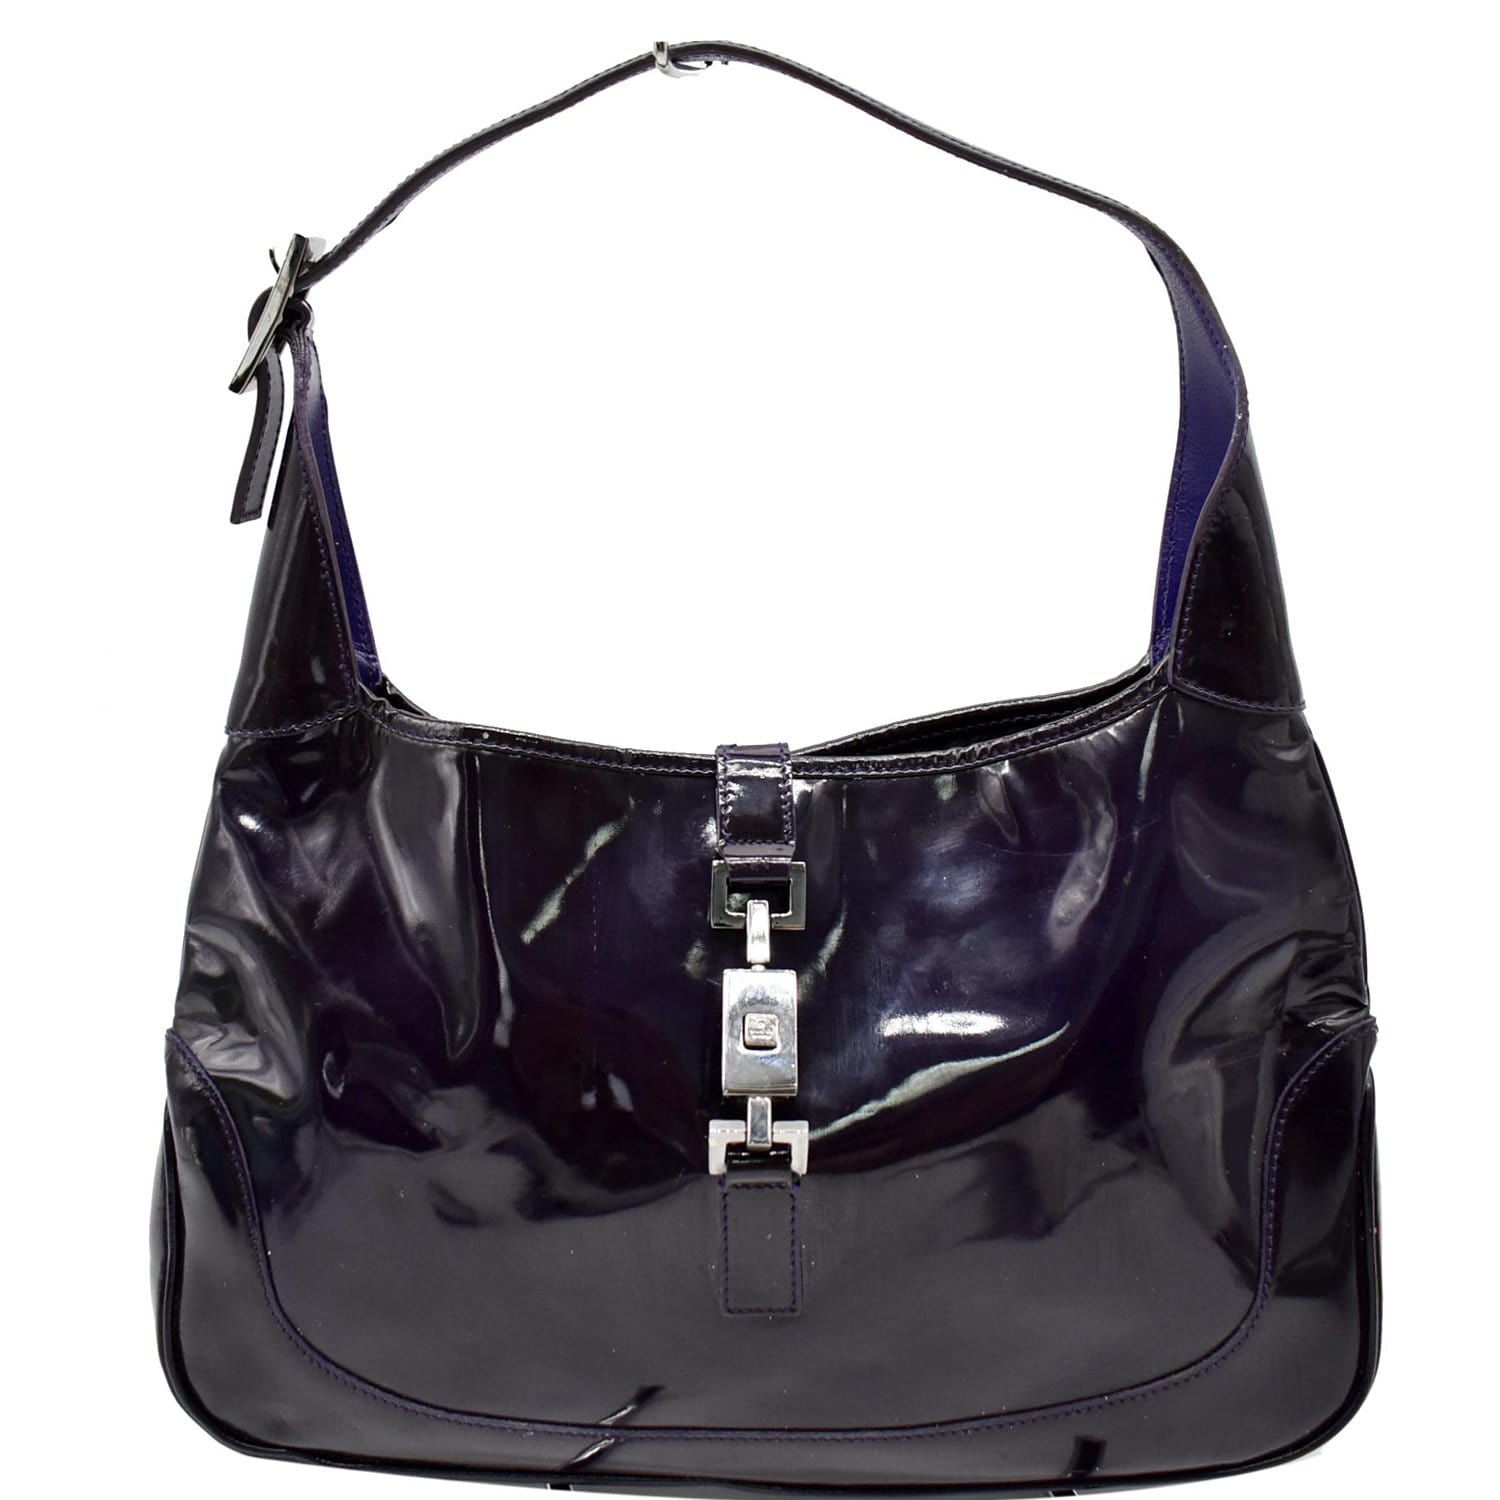 Gucci Patent Leather Emily Shoulder Bag | Gucci Handbags | Bag Borrow or  Steal